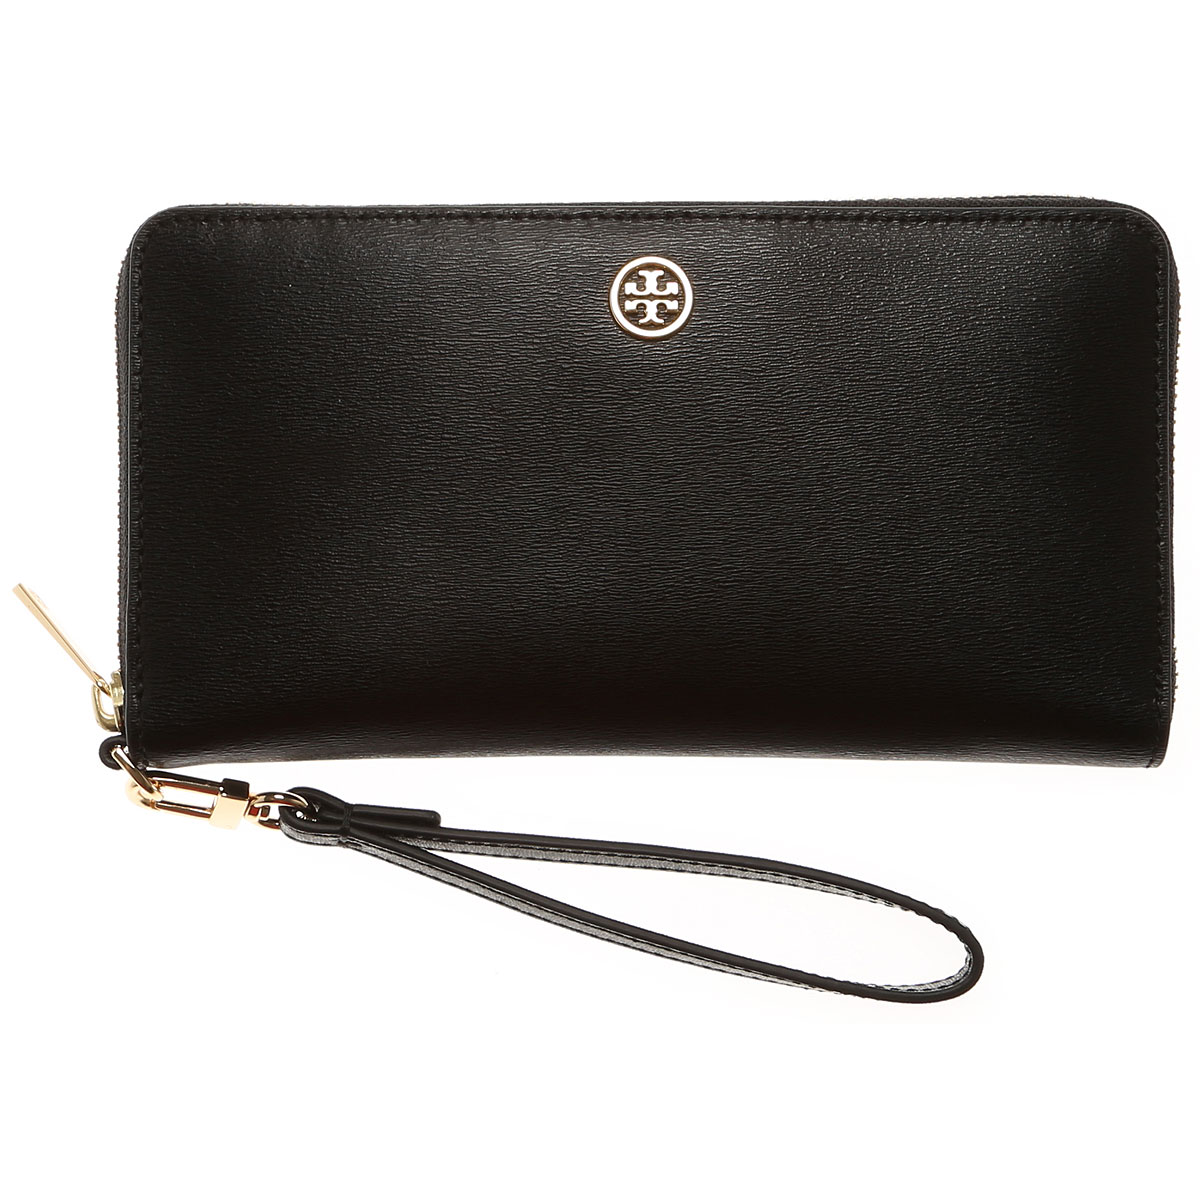 Womens Wallets Tory Burch, Style code: 36799-001-